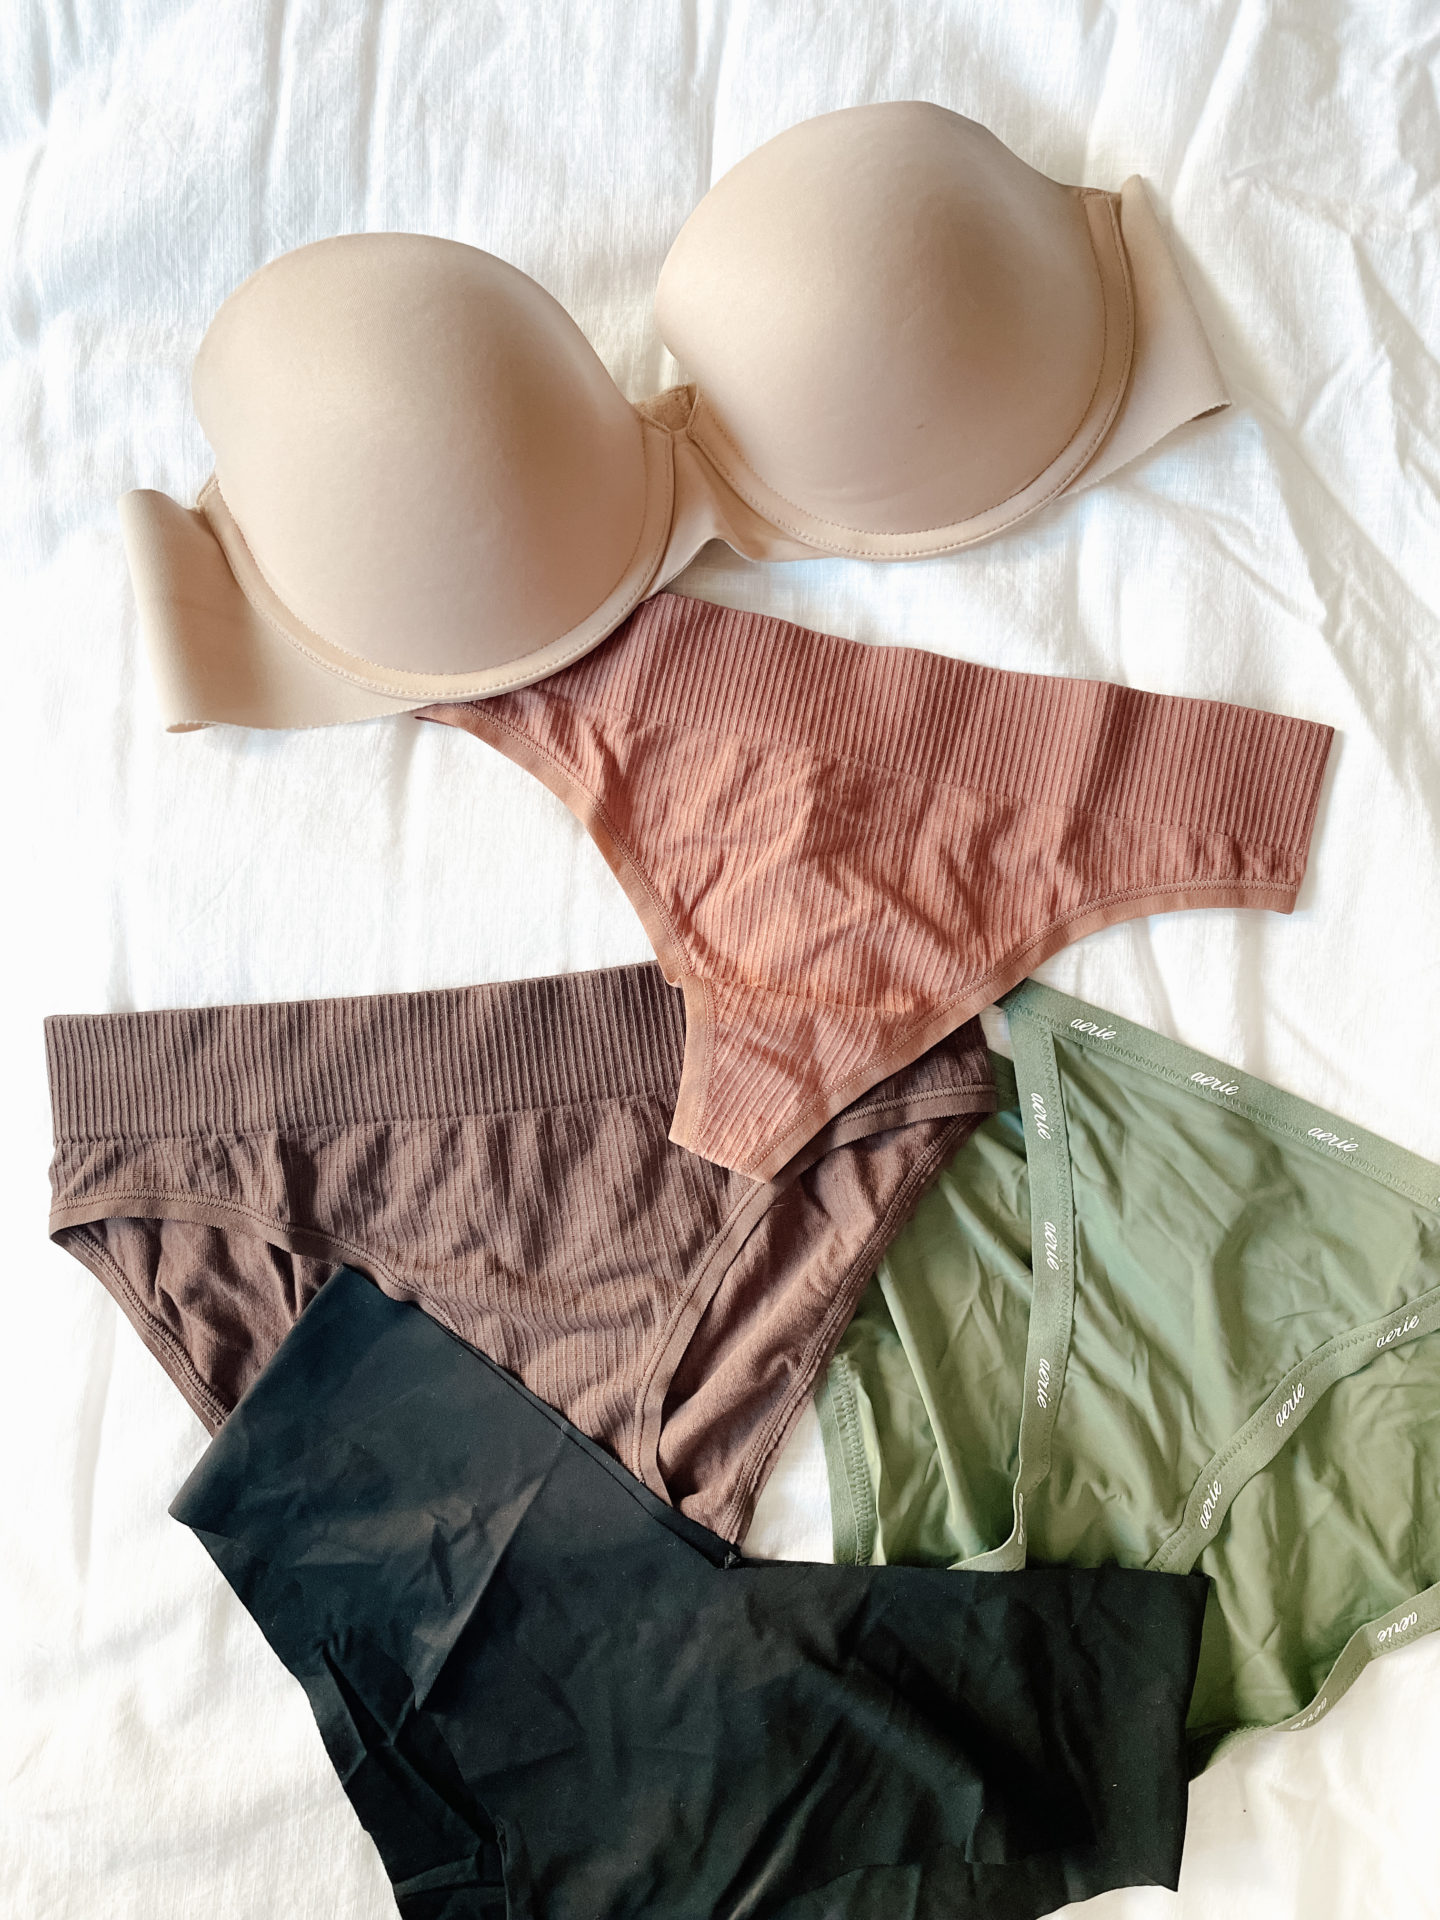 Spring Clean Your Undies Drawer! Here Are the Bras and Undies I